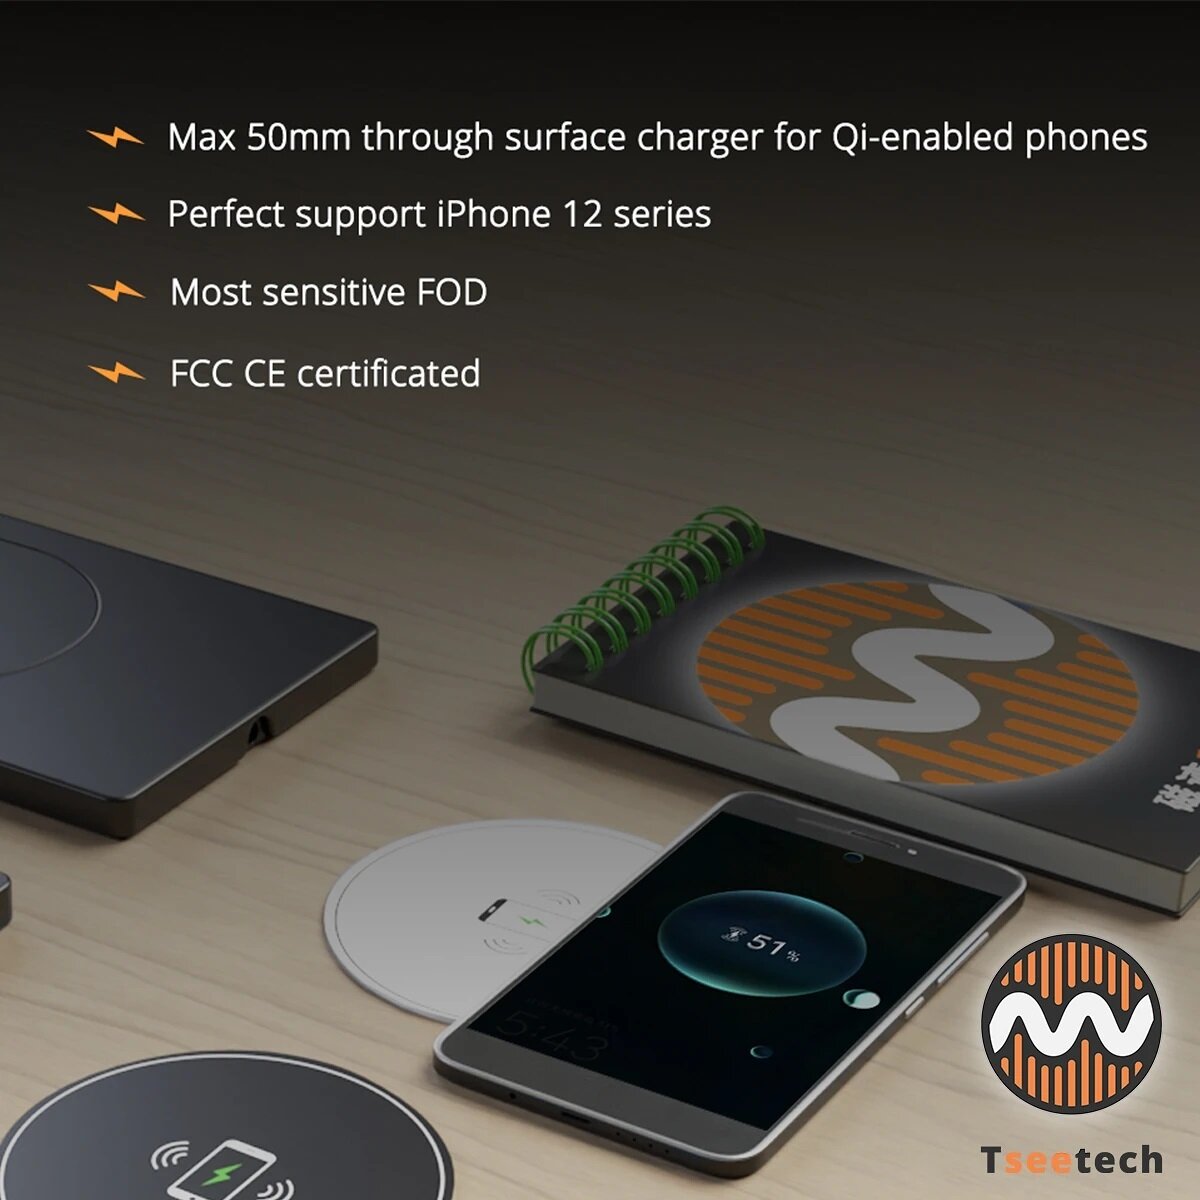 Tseetech through surface wireless charger, with max 50mm charging distance, no cutting no clutter. 
Besides all Qi-enabled phones, it also perfectly support the whole iPhone12 series. 
Check it out via: tseetech.com

#wirelesscharger 
#throughsurface